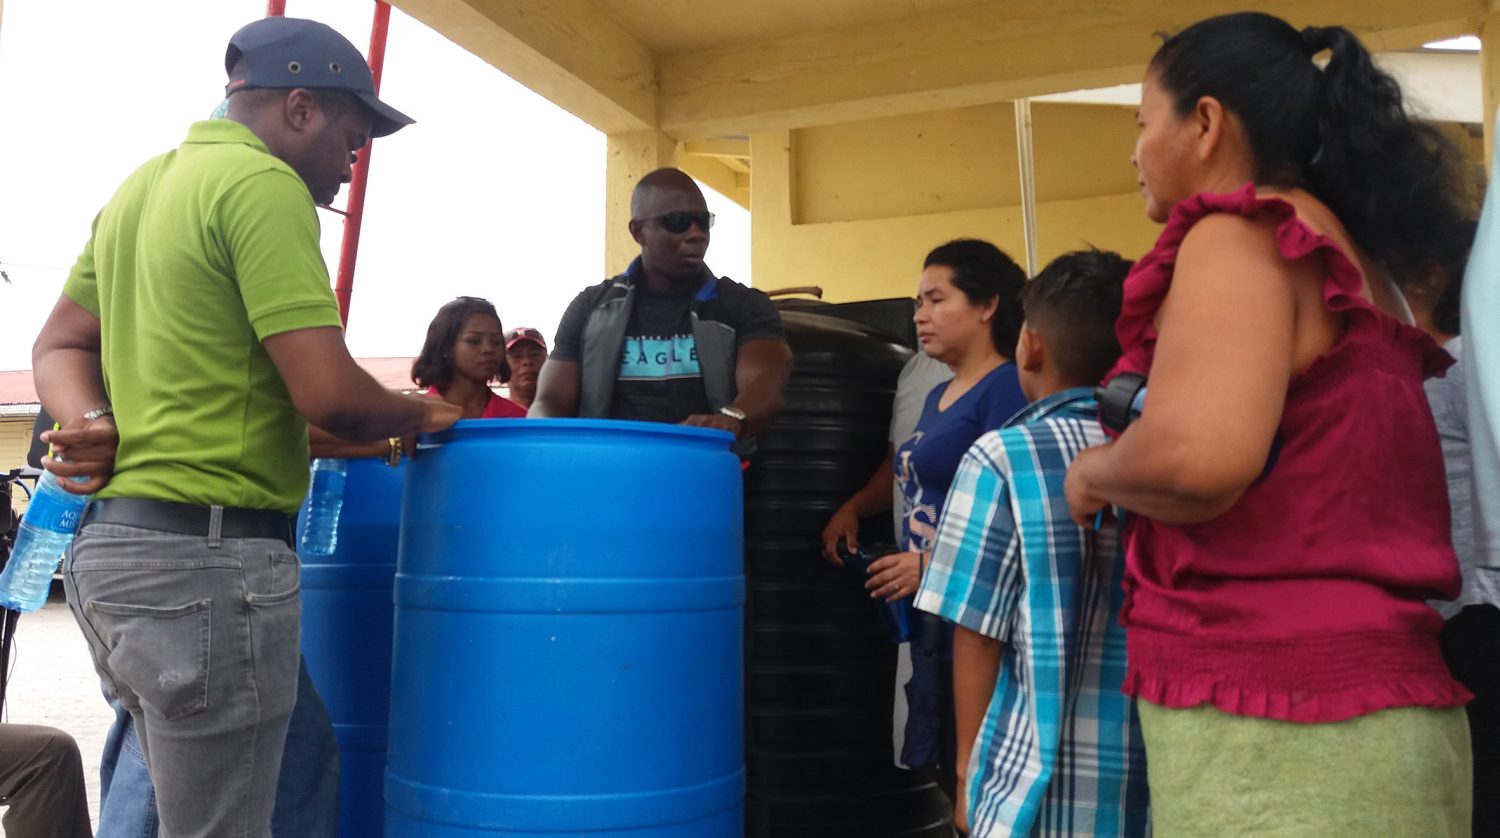 GWI’s Operations Director, Dwayne Shako  (centre) explains the Slow Sand Filtration system to residents of Wakapoa. (GWI photo)
